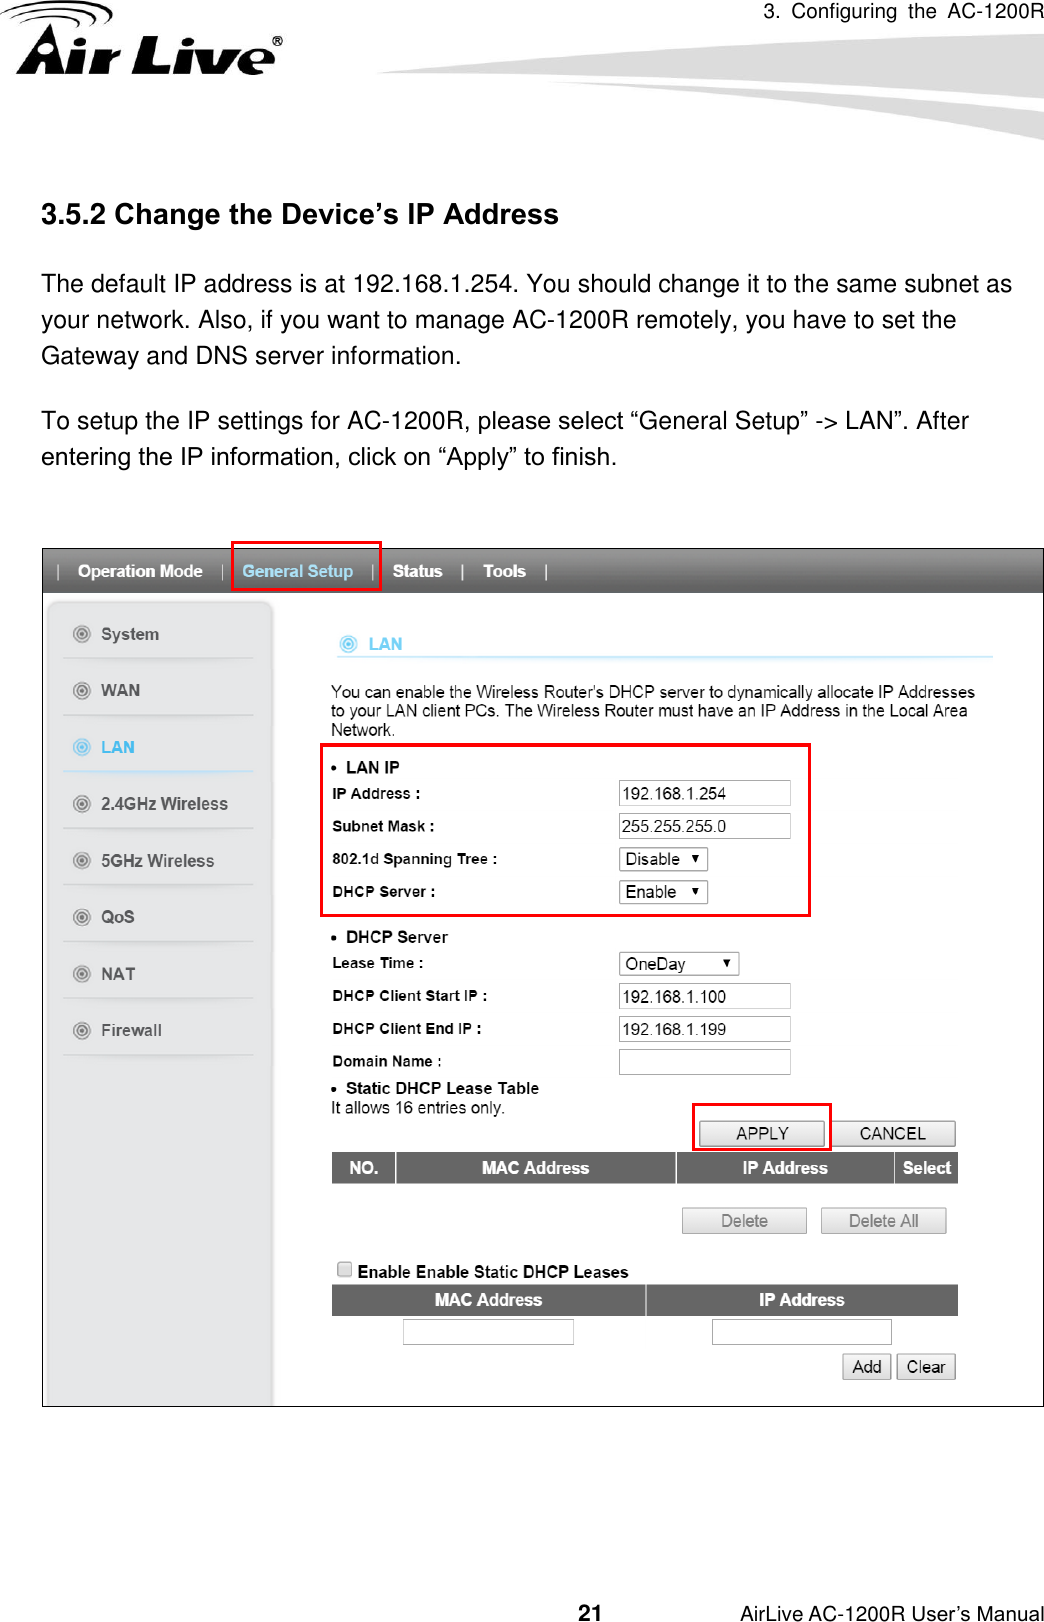 3.  Configuring  the  AC-1200R                                         21           AirLive AC-1200R User’s Manual  3.5.2 Change the Device’s IP Address   The default IP address is at 192.168.1.254. You should change it to the same subnet as your network. Also, if you want to manage AC-1200R remotely, you have to set the Gateway and DNS server information. To setup the IP settings for AC-1200R, please select “General Setup” -&gt; LAN”. After entering the IP information, click on “Apply” to finish.     